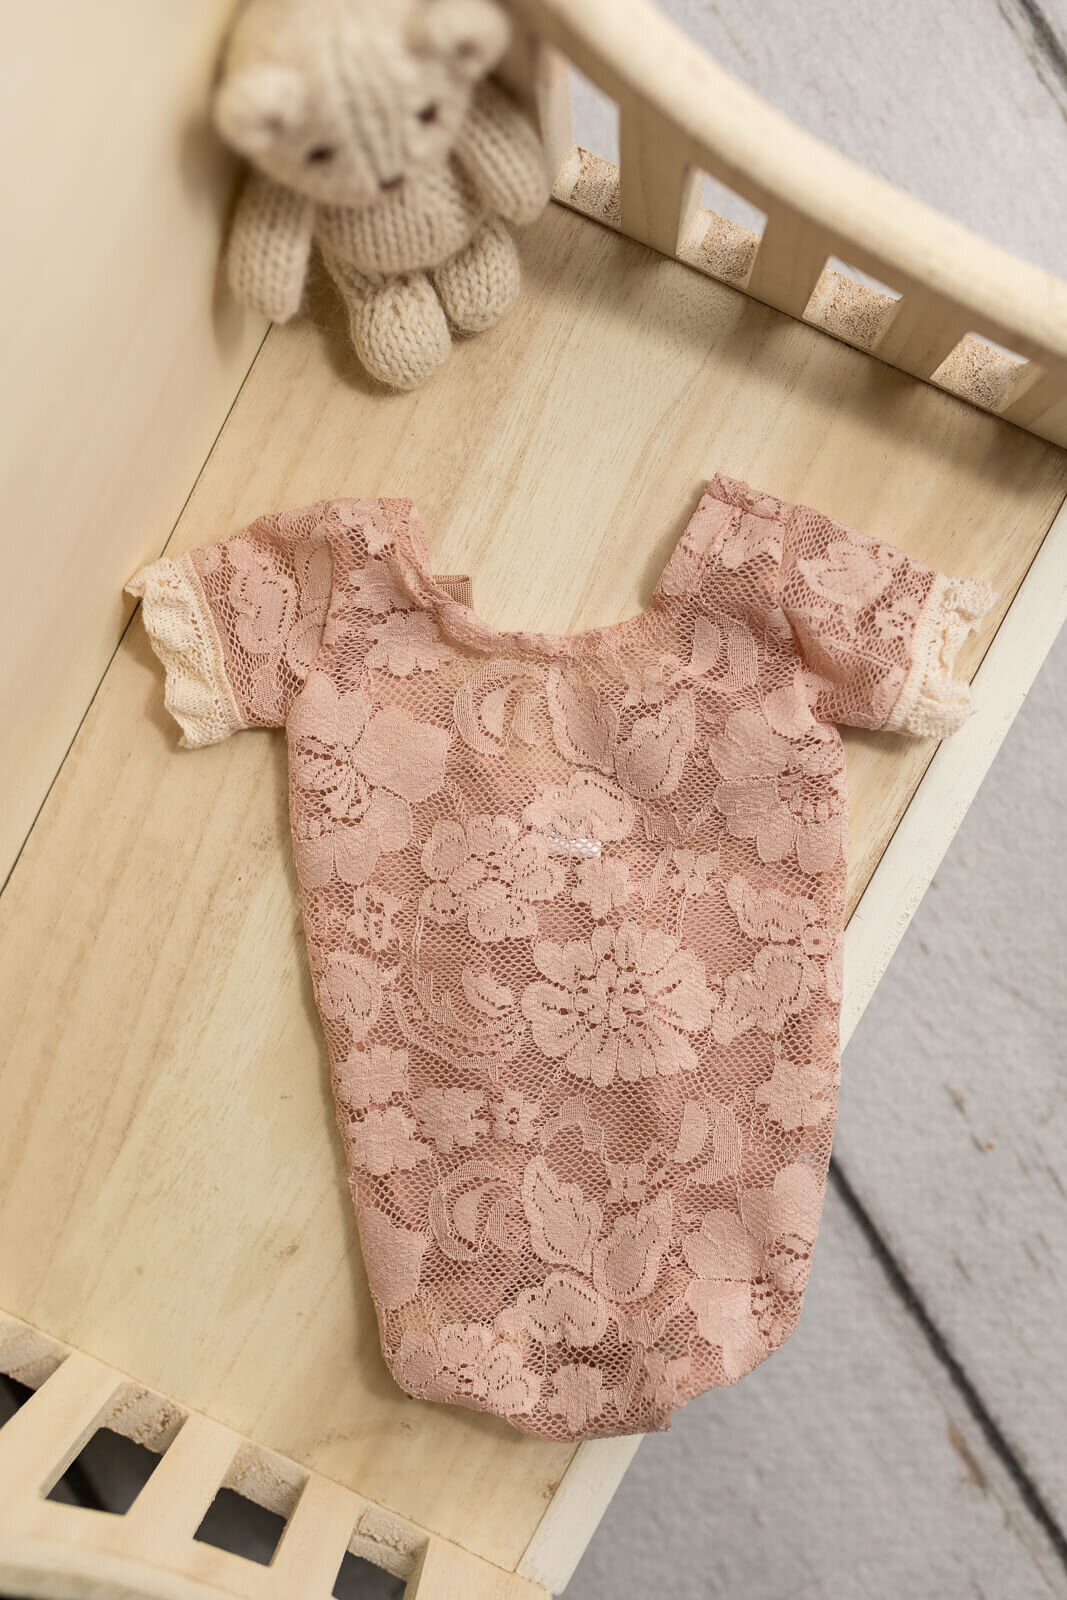 Delicate pink lace onesie for newborn photography sessions by Jennifer Brandes.